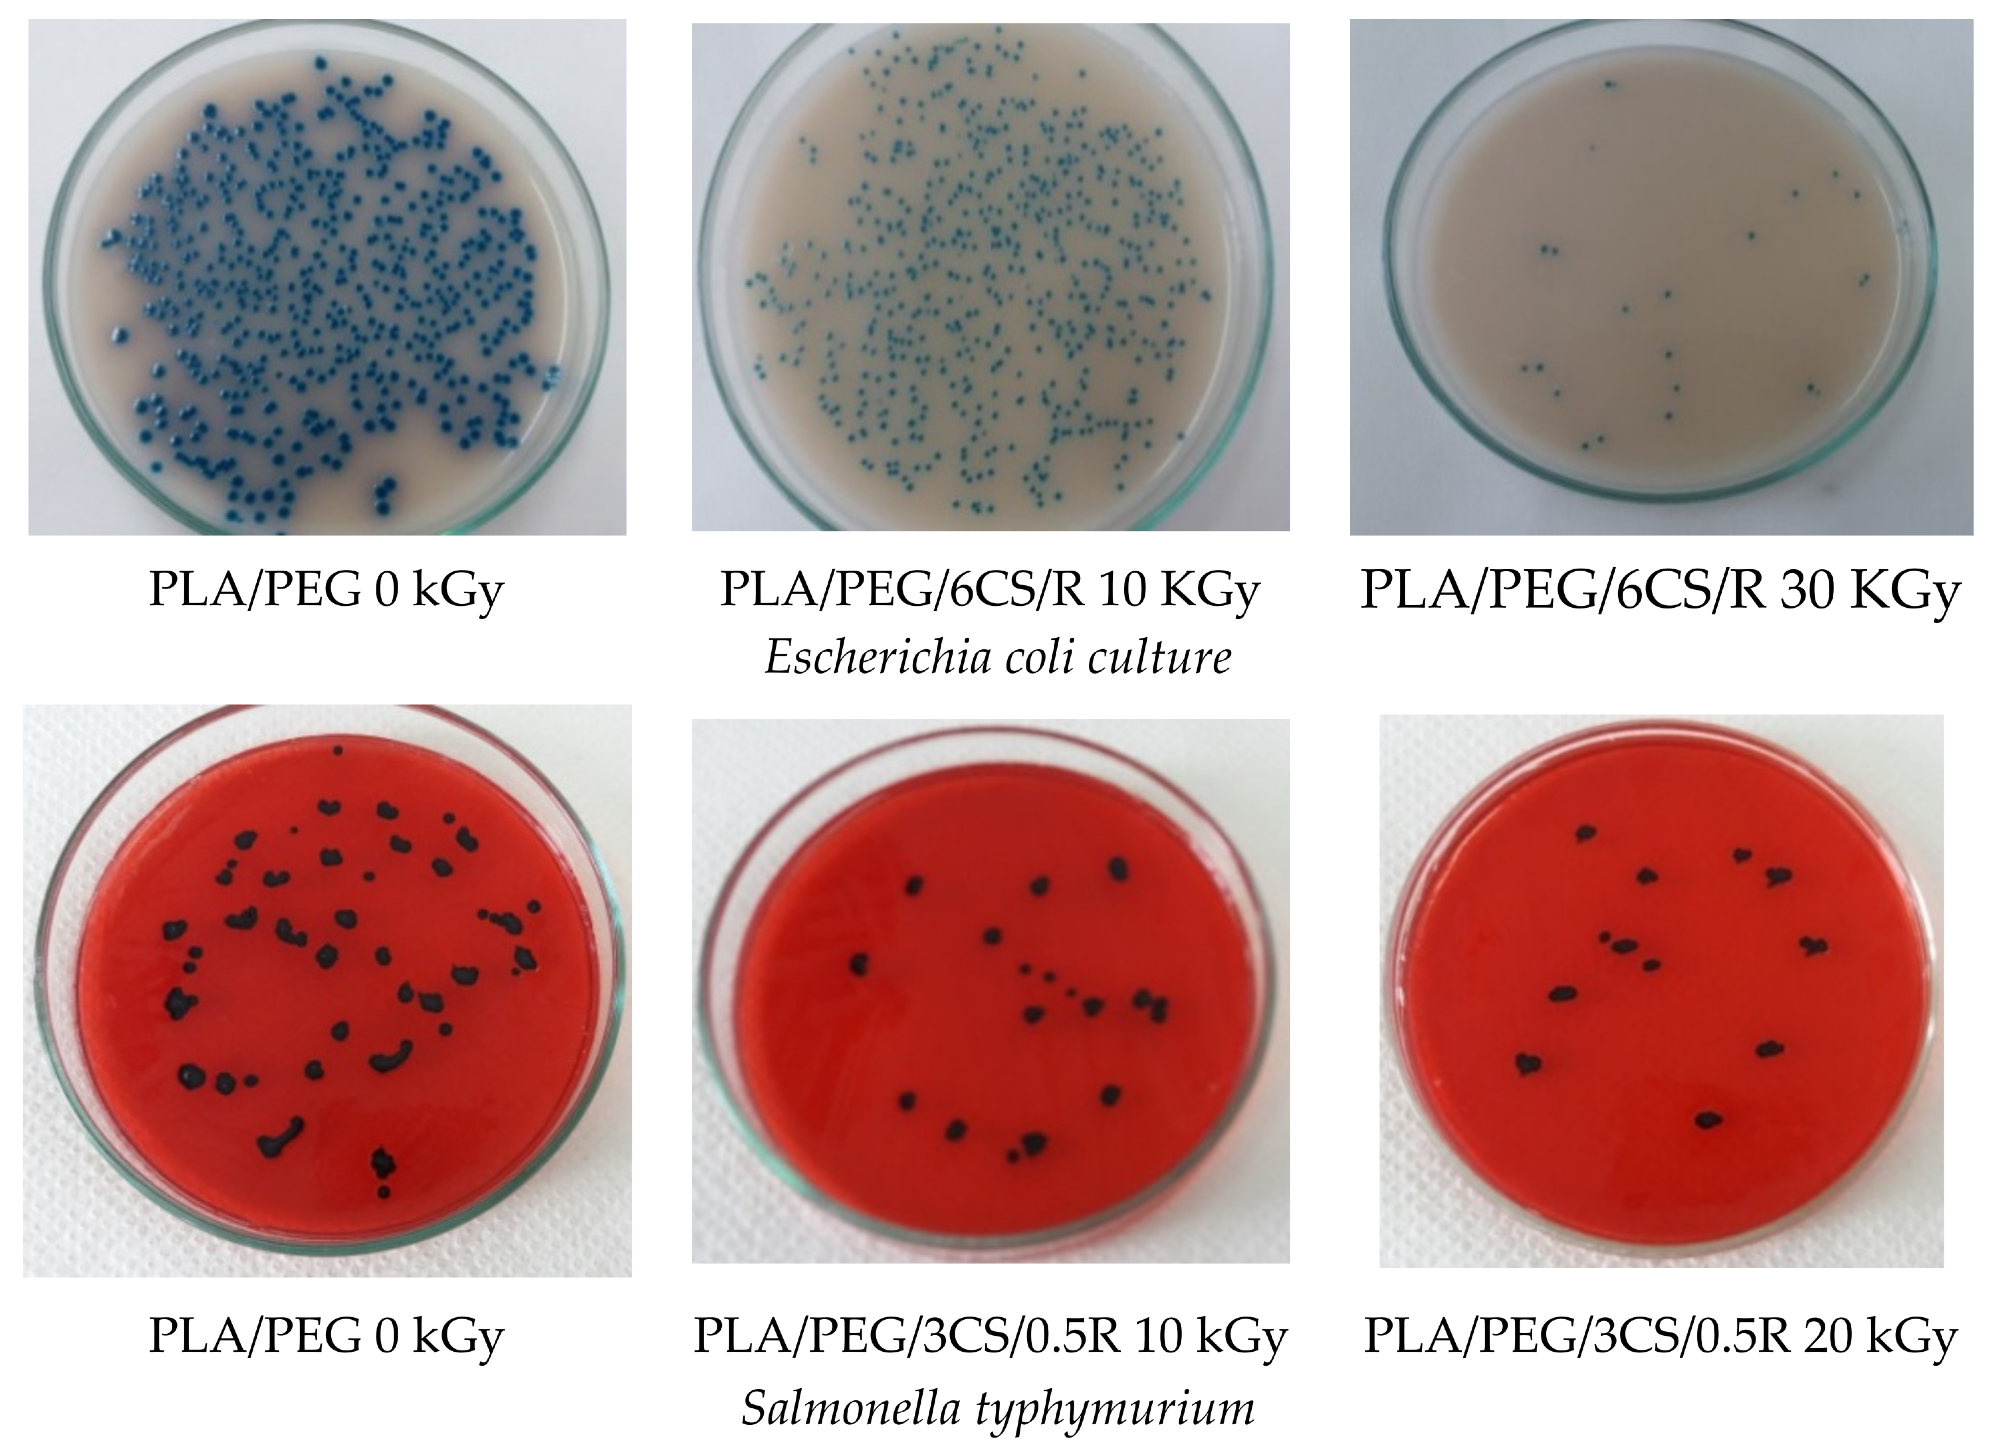 Microscopical aspects of the three bacterial cultures in the presence of PLA-based systems before and after irradiation.